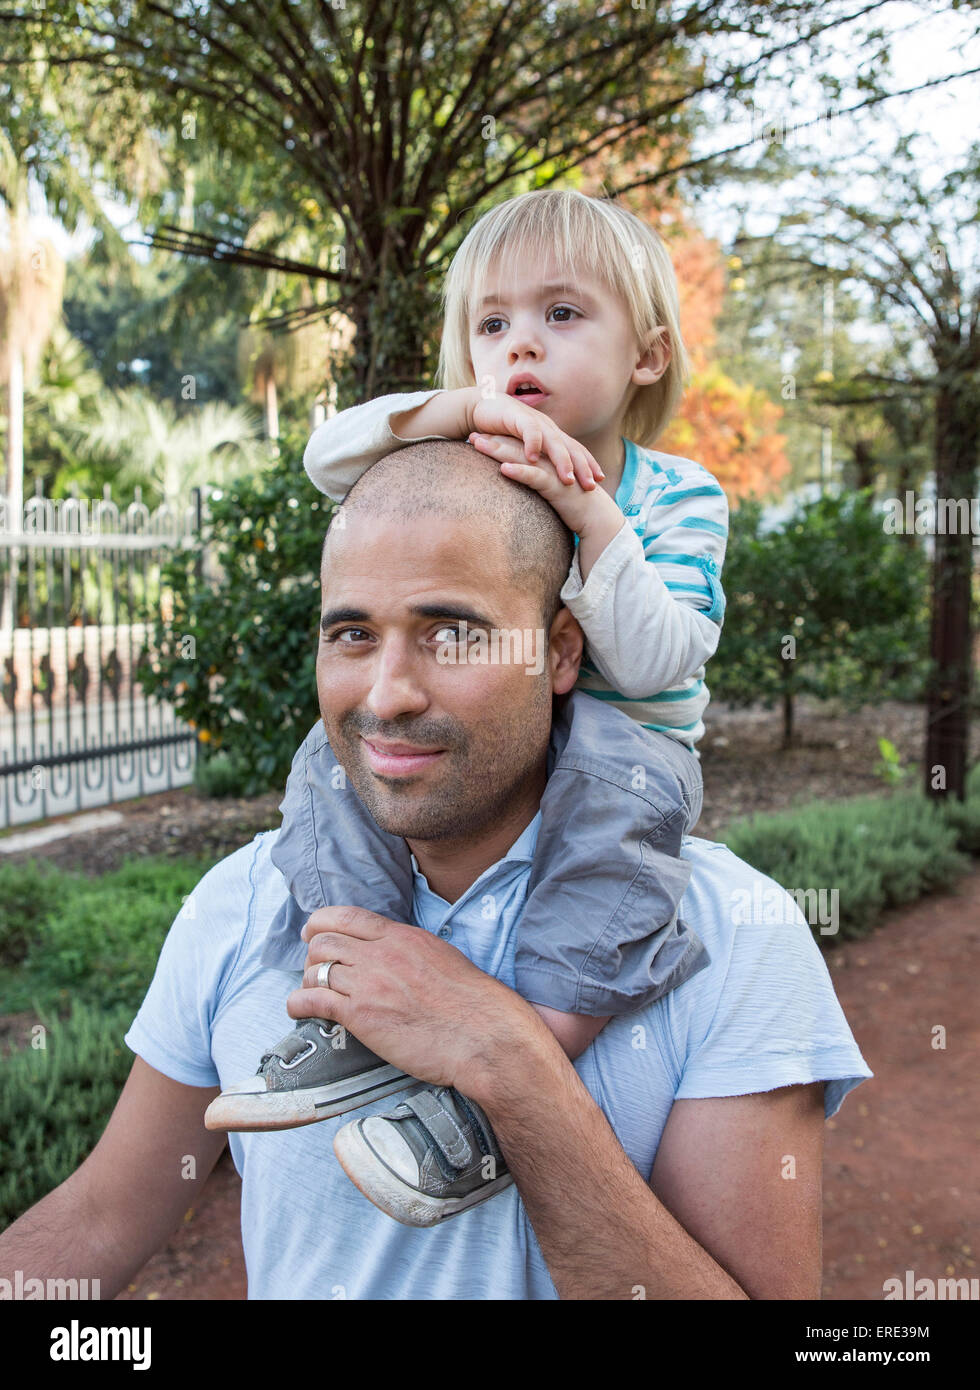 Hispanic father carrying son on shoulders in park Banque D'Images